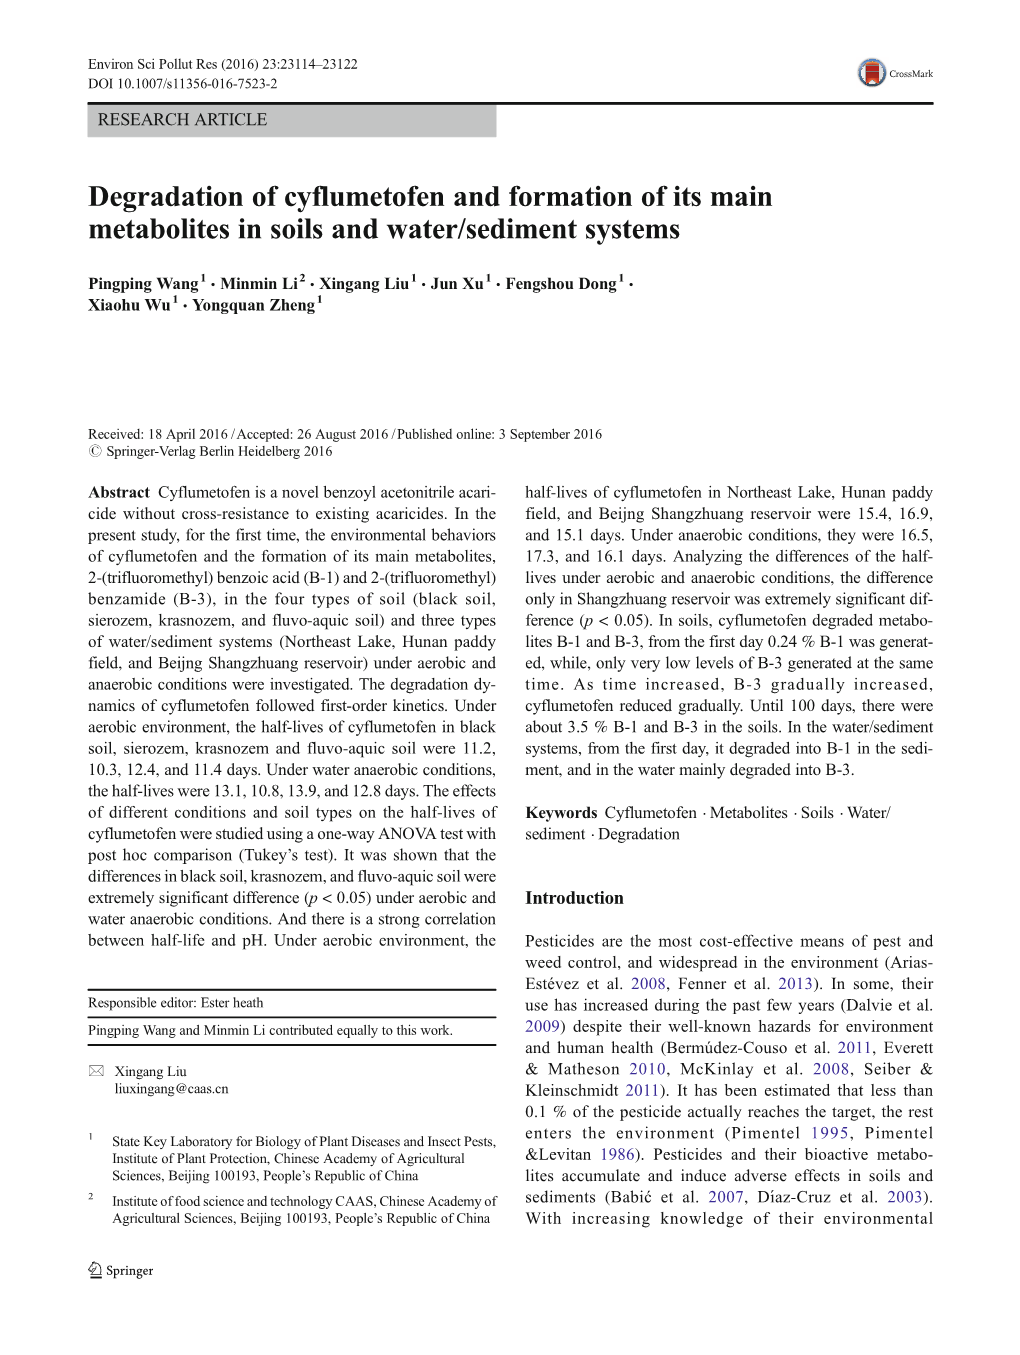 Degradation of Cyflumetofen and Formation of Its Main Metabolites in Soils and Water/Sediment Systems